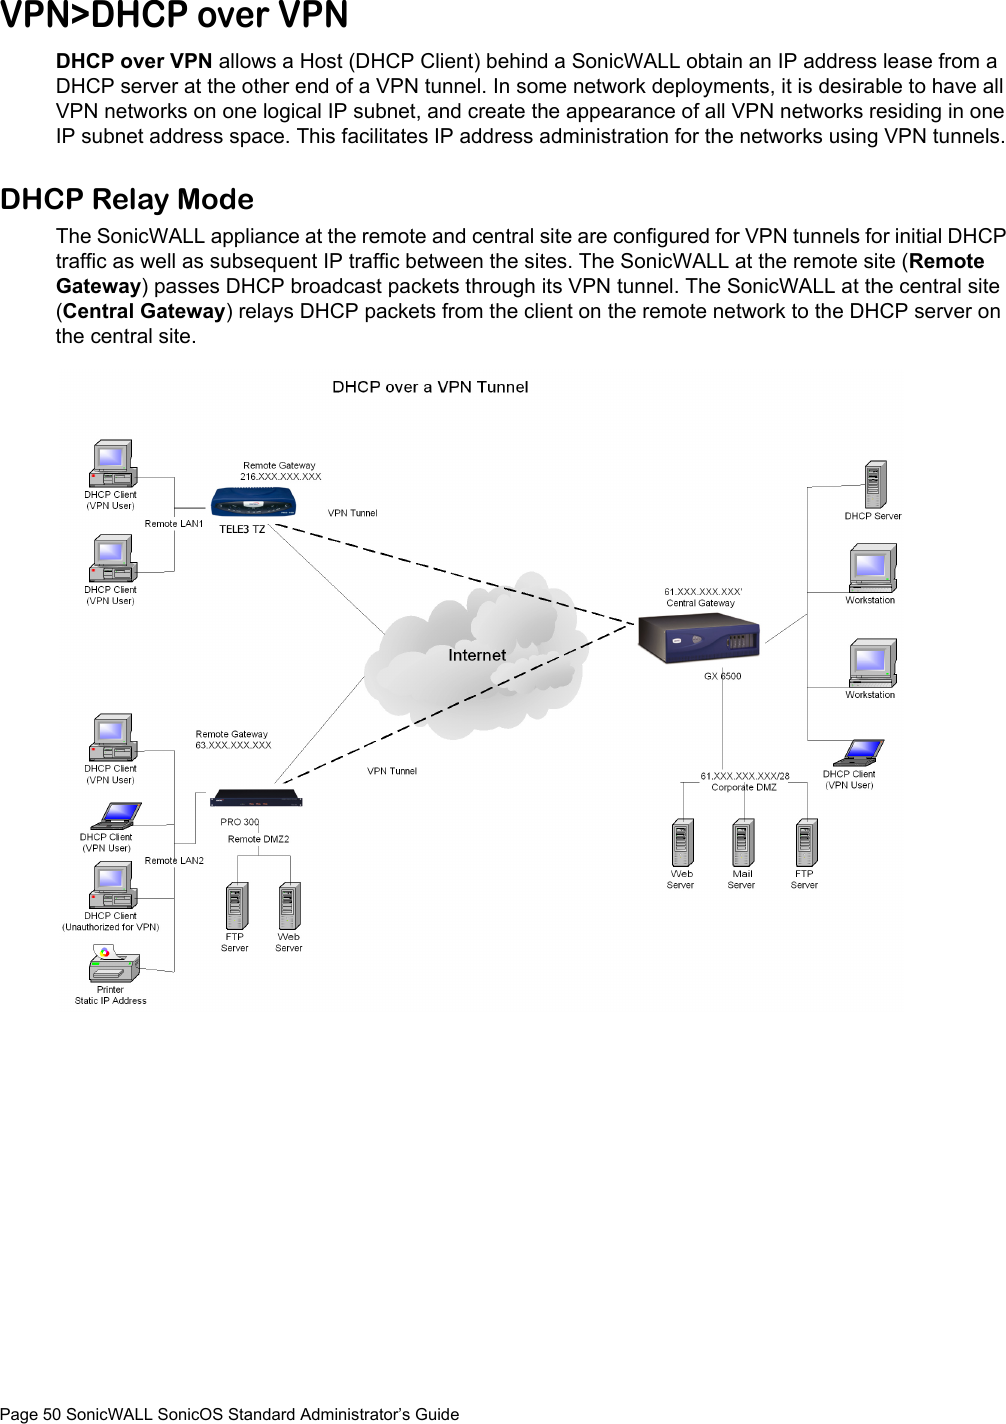 Page 50 SonicWALL SonicOS Standard Administrator’s GuideVPN&gt;DHCP over VPNDHCP over VPN allows a Host (DHCP Client) behind a SonicWALL obtain an IP address lease from a DHCP server at the other end of a VPN tunnel. In some network deployments, it is desirable to have all VPN networks on one logical IP subnet, and create the appearance of all VPN networks residing in one IP subnet address space. This facilitates IP address administration for the networks using VPN tunnels.DHCP Relay ModeThe SonicWALL appliance at the remote and central site are configured for VPN tunnels for initial DHCP traffic as well as subsequent IP traffic between the sites. The SonicWALL at the remote site (Remote Gateway) passes DHCP broadcast packets through its VPN tunnel. The SonicWALL at the central site (Central Gateway) relays DHCP packets from the client on the remote network to the DHCP server on the central site.